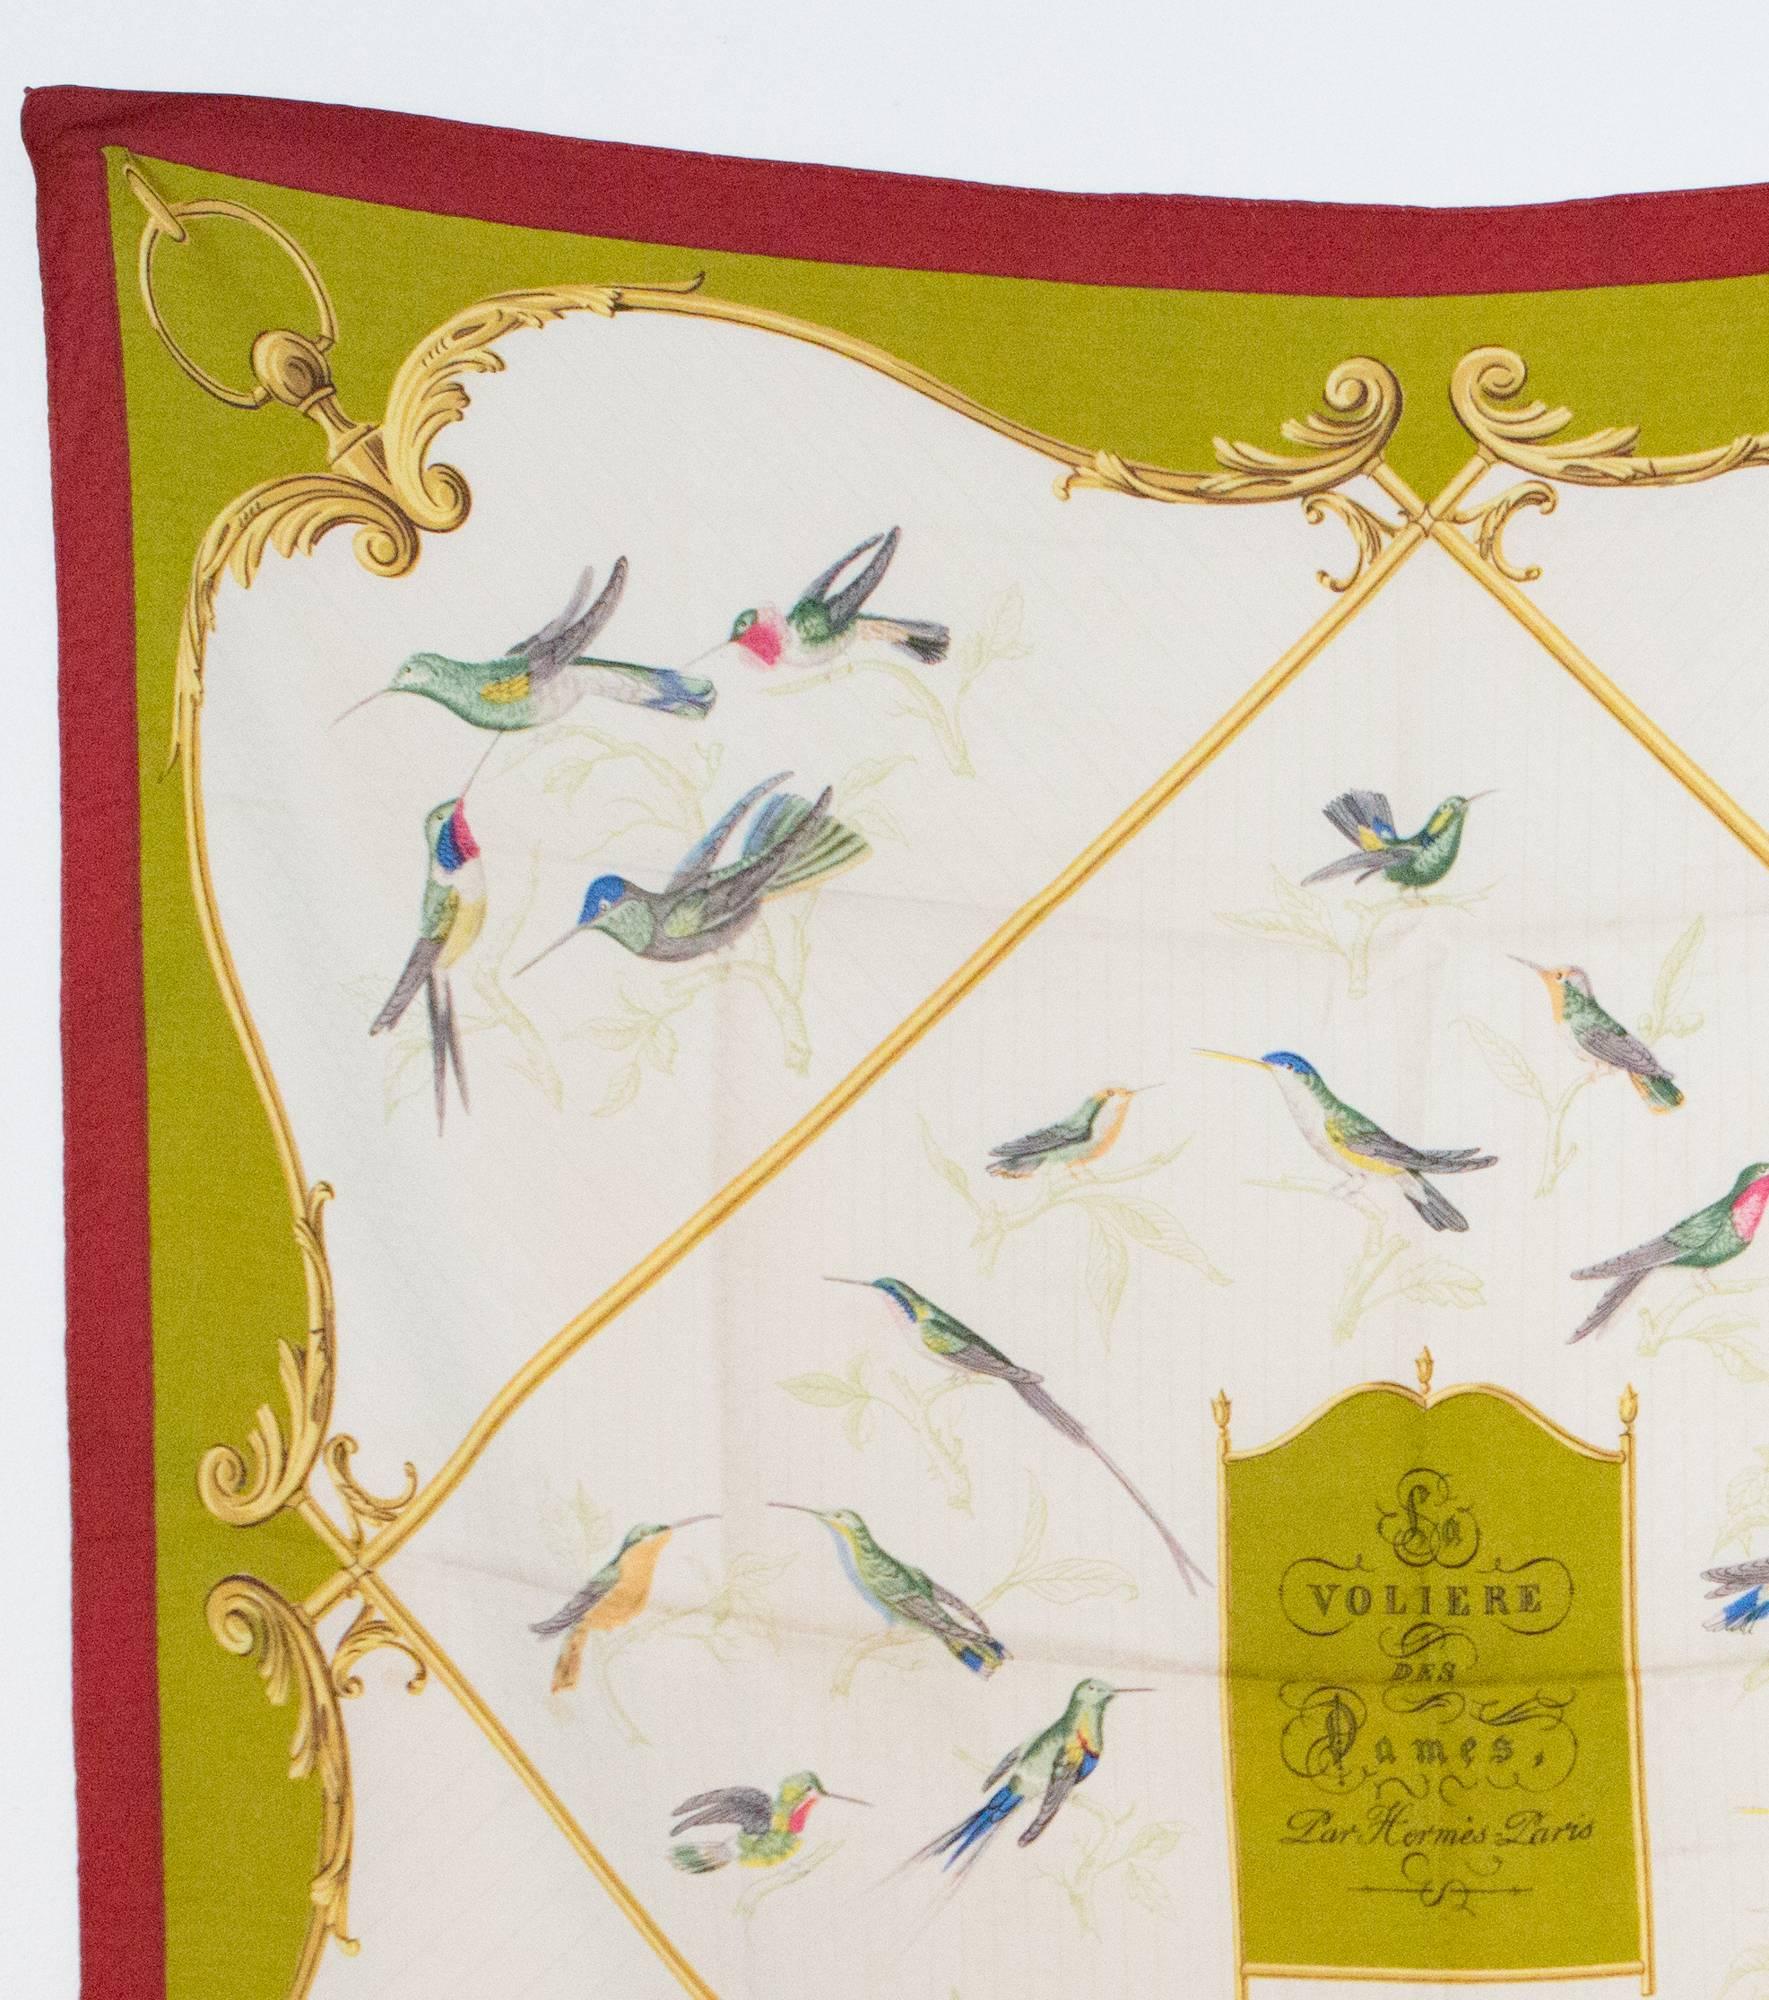 1960s Hermes  « A la volière Des Dames » multi scarf featuring a jacquard silk ground, a birds scenic print. 35,4in. (90cm) x 35,4in. (90cm)
In excellent vintage condition. Made in France.
We guarantee you will receive this gorgeous item as